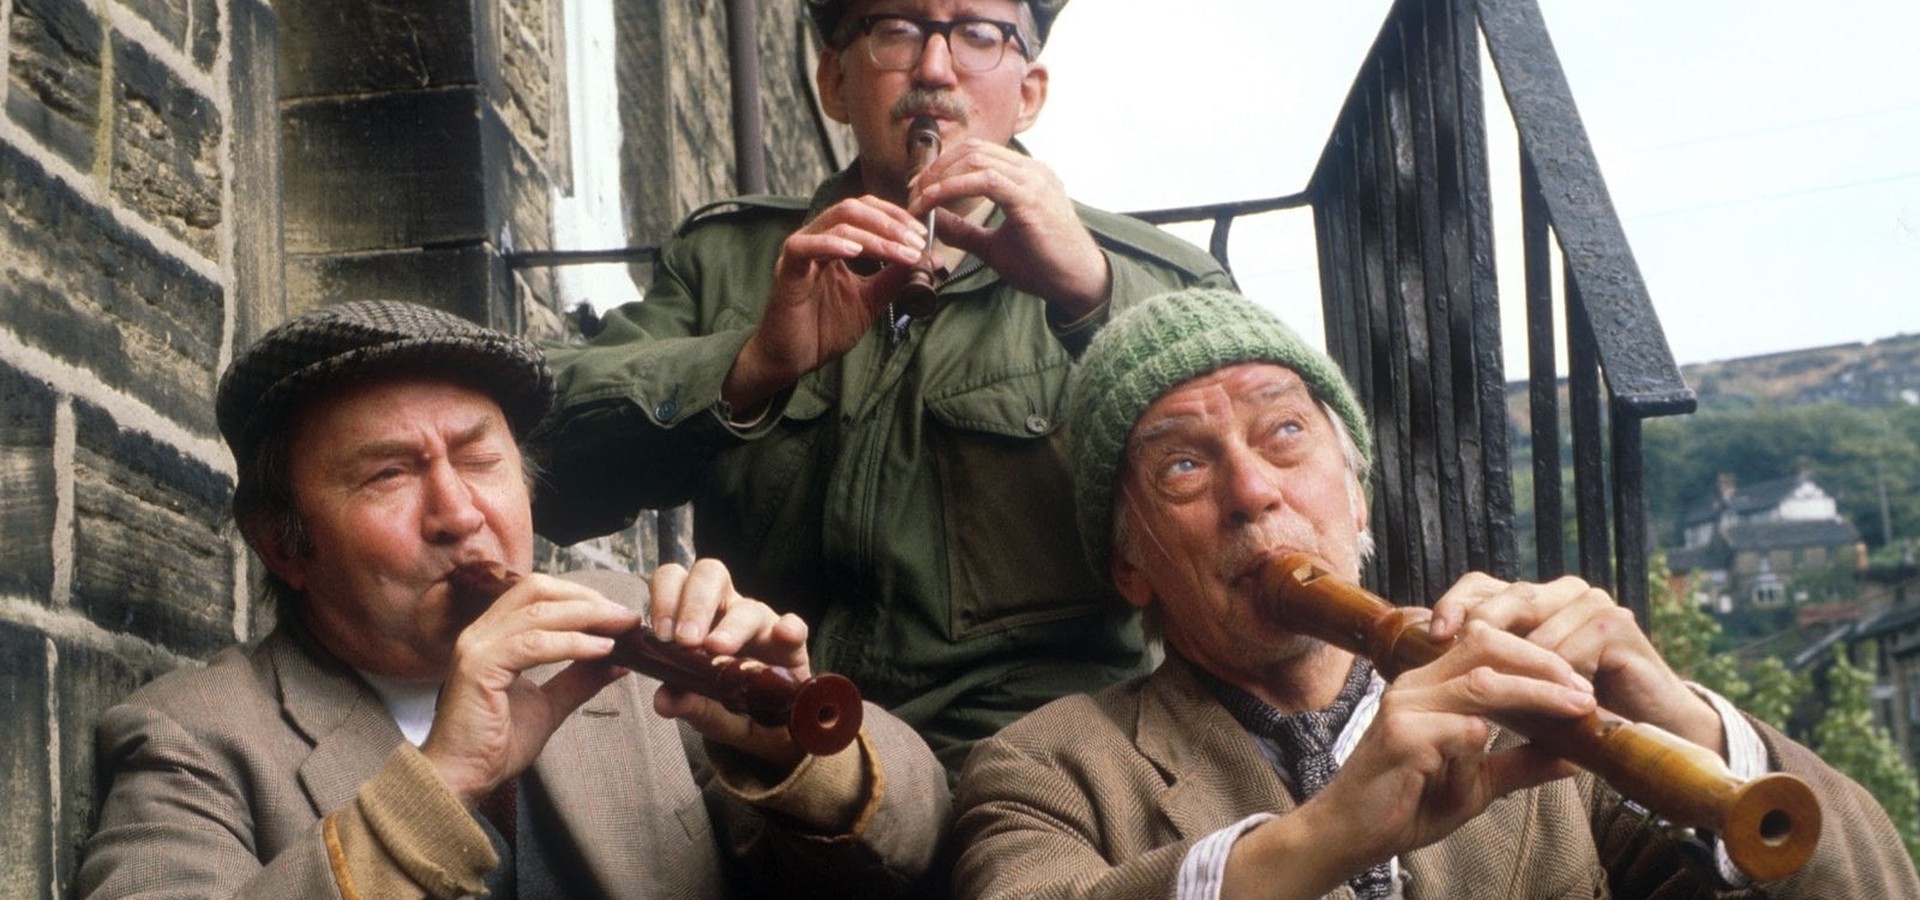 Last of the Summer Wine streaming online